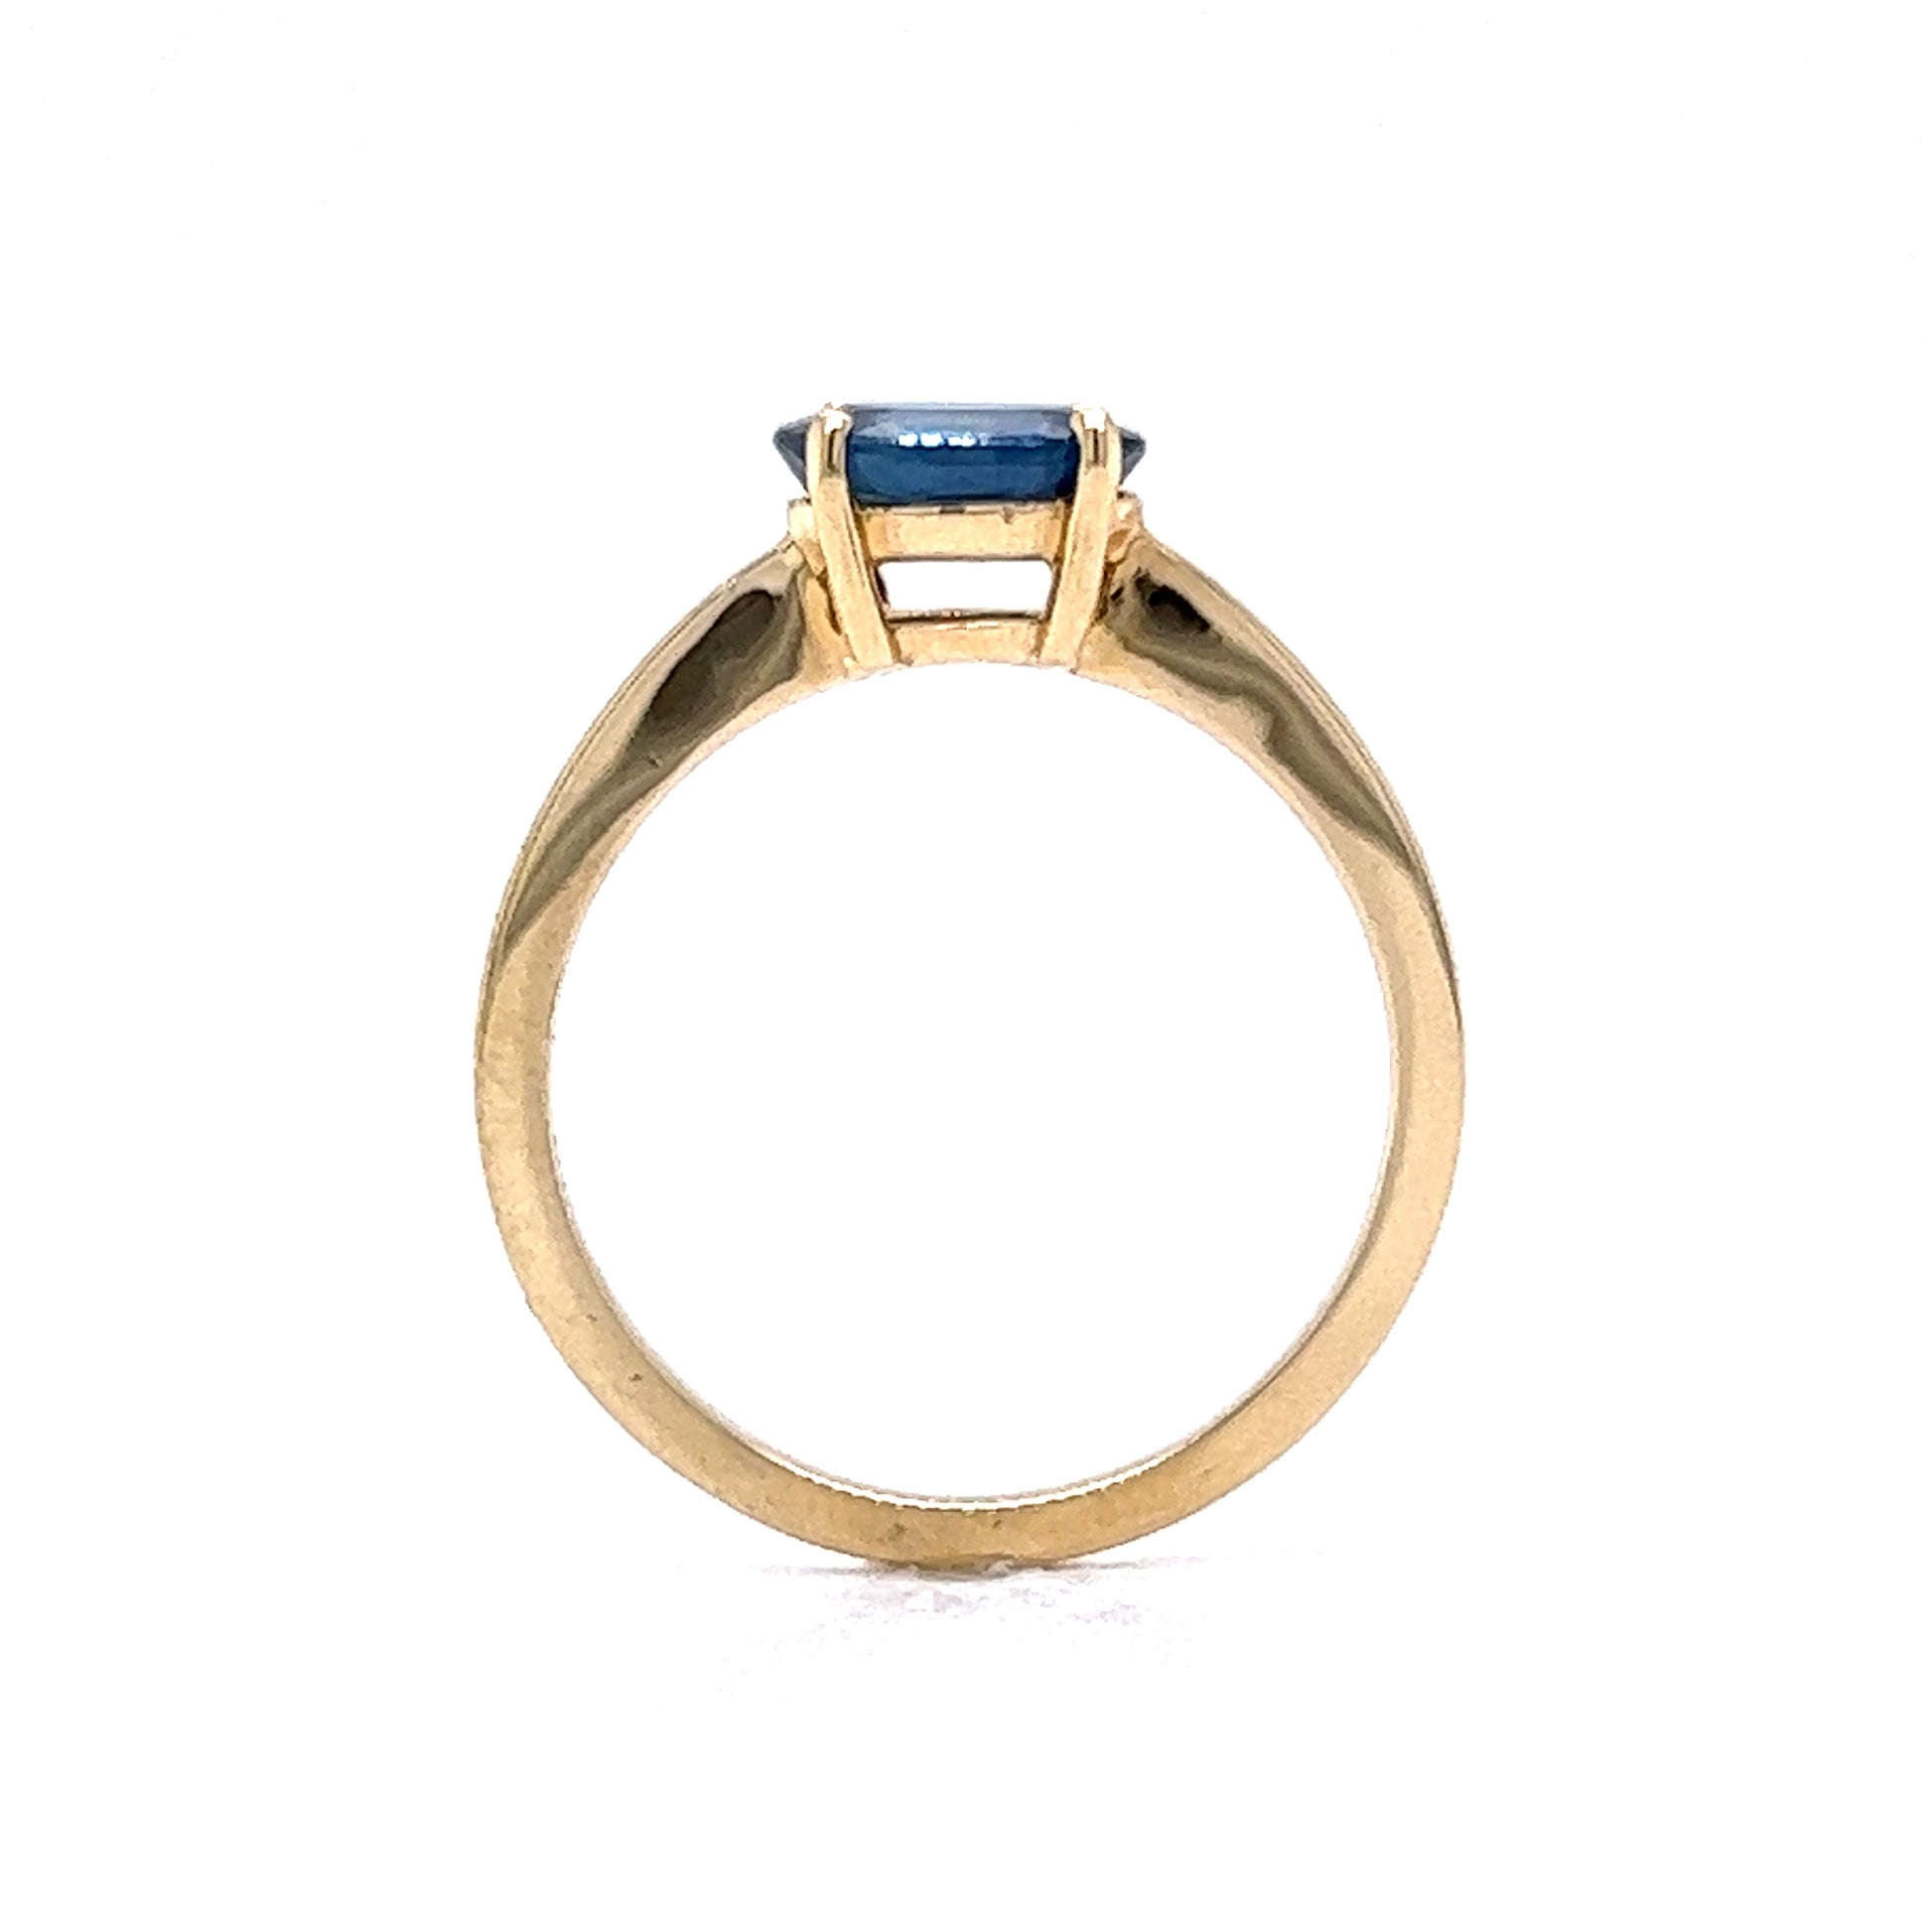 1.31 Carat Sapphire Engagement Ring in 14K Yellow Gold